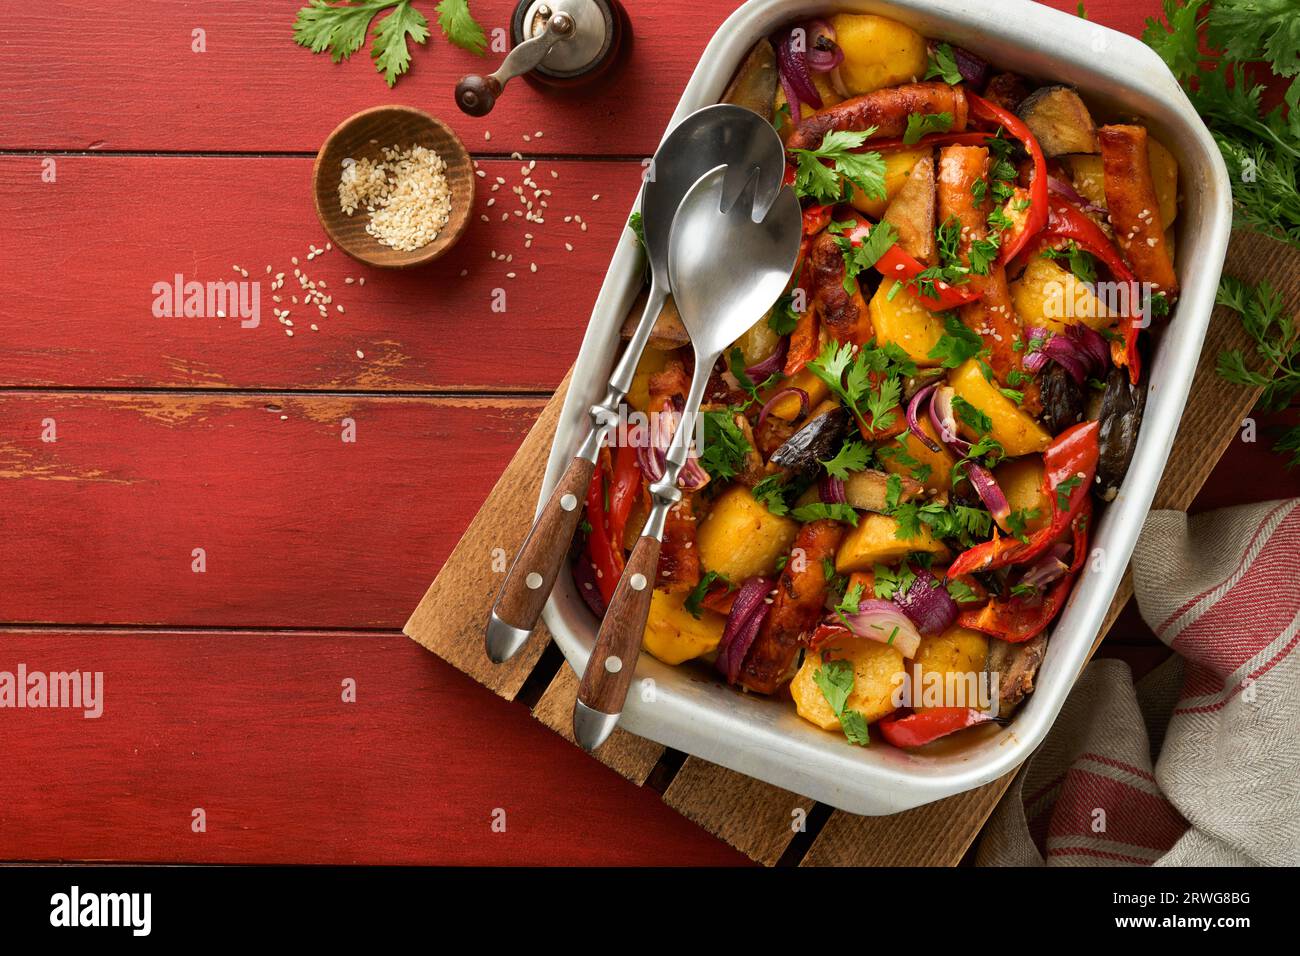 Baked sausage and vegetables, peppers, zucchini, tomatoes, red onion and eggplant with sesame and cilantro served hot from oven on baking tray. Tradit Stock Photo